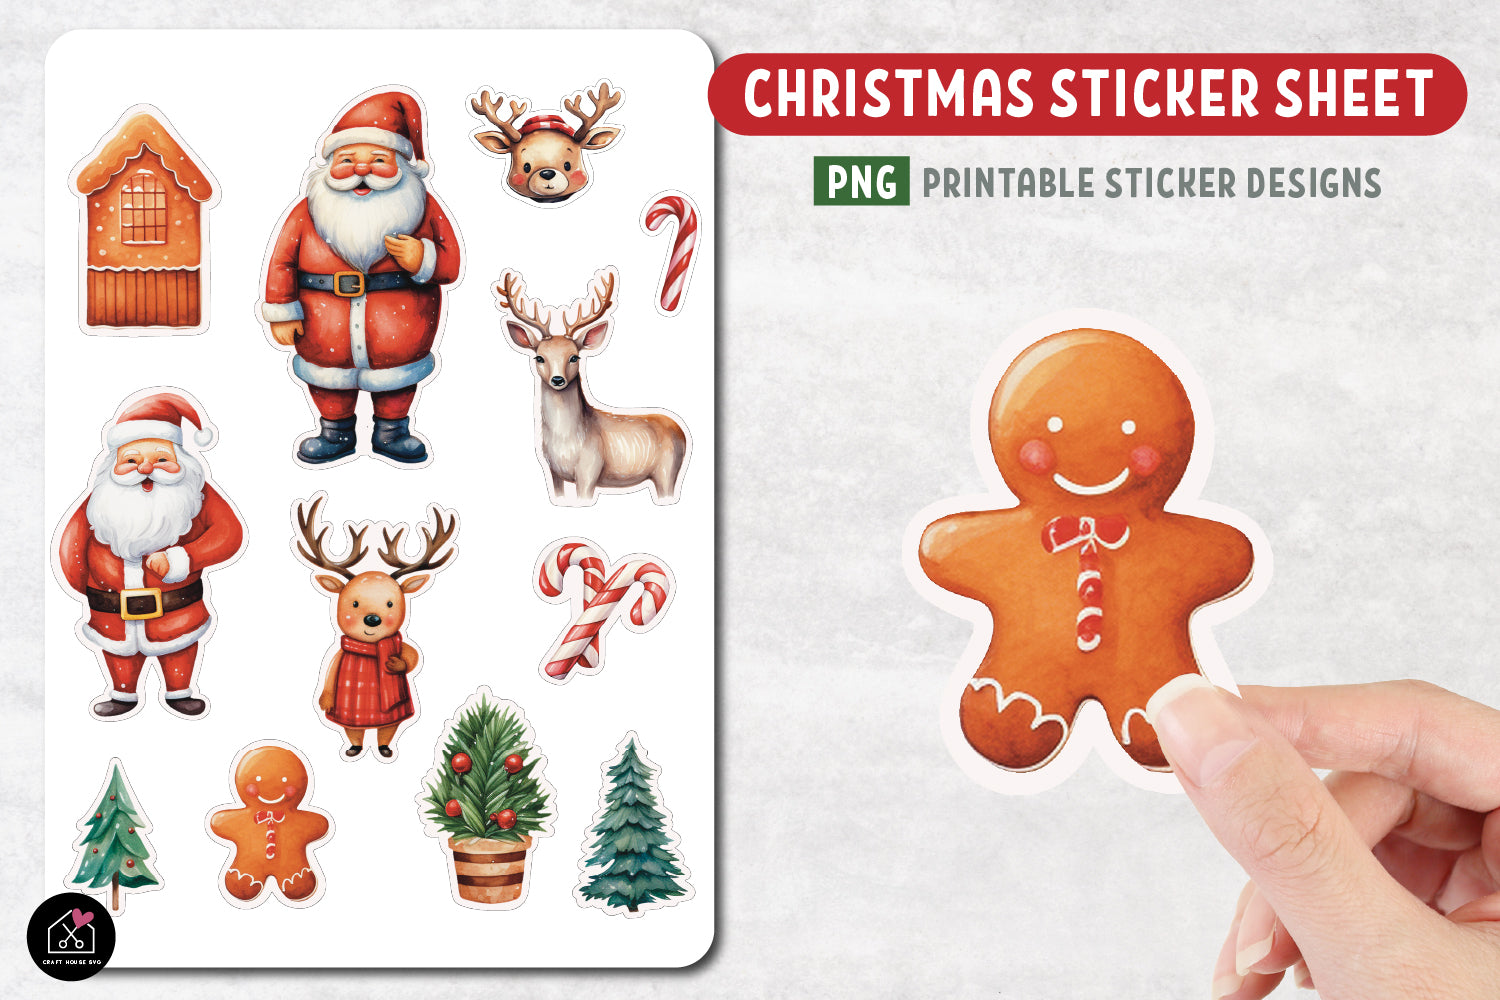 Christmas Stickers PNG Print and Cut Santa Sticker Designs